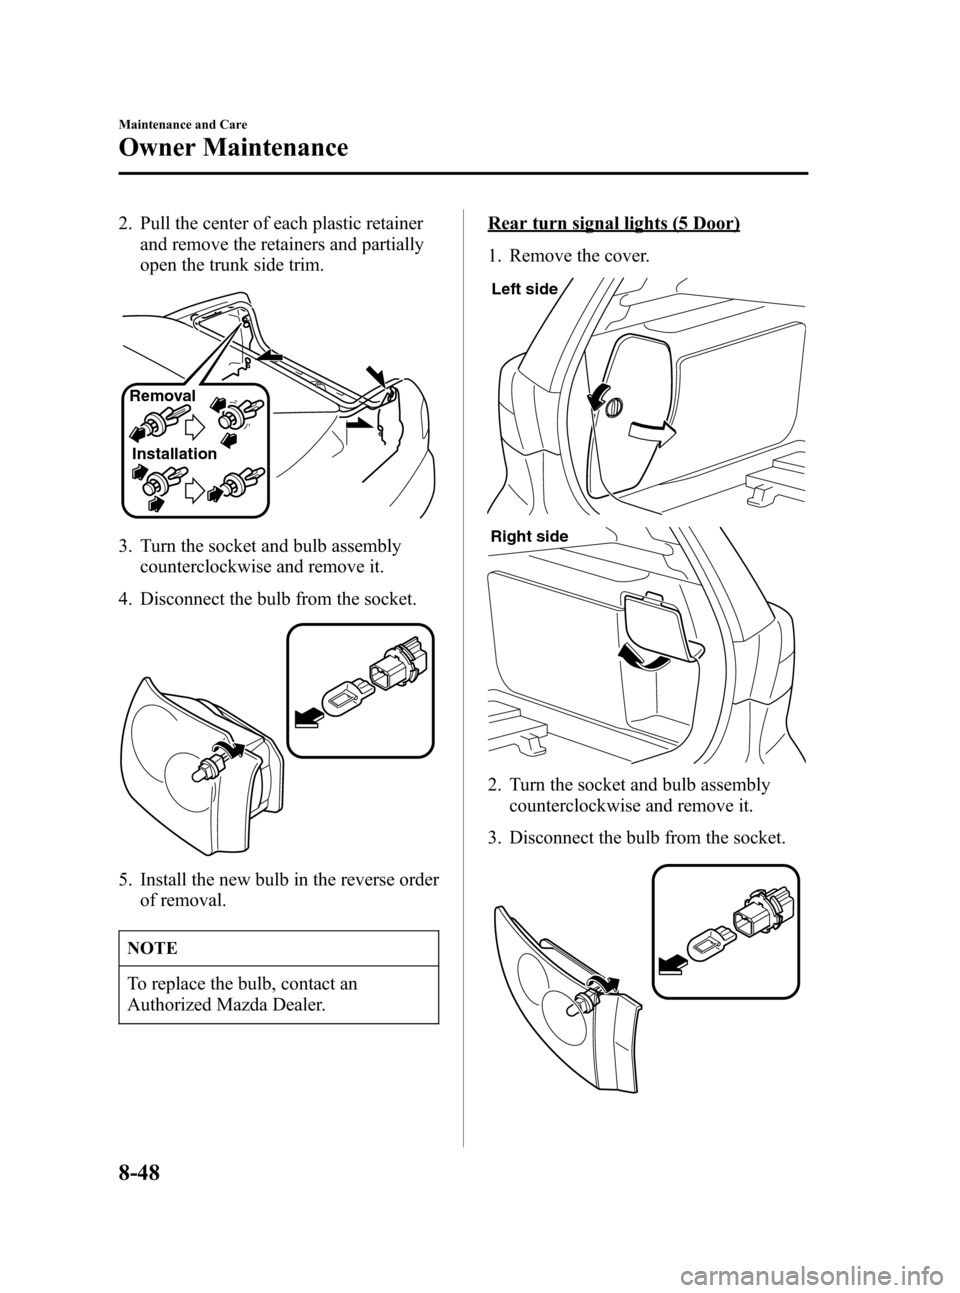 MAZDA MODEL 3 HATCHBACK 2007  Owners Manual (in English) Black plate (322,1)
2. Pull the center of each plastic retainer
and remove the retainers and partially
open the trunk side trim.
Removal
Installation
3. Turn the socket and bulb assembly
counterclockw